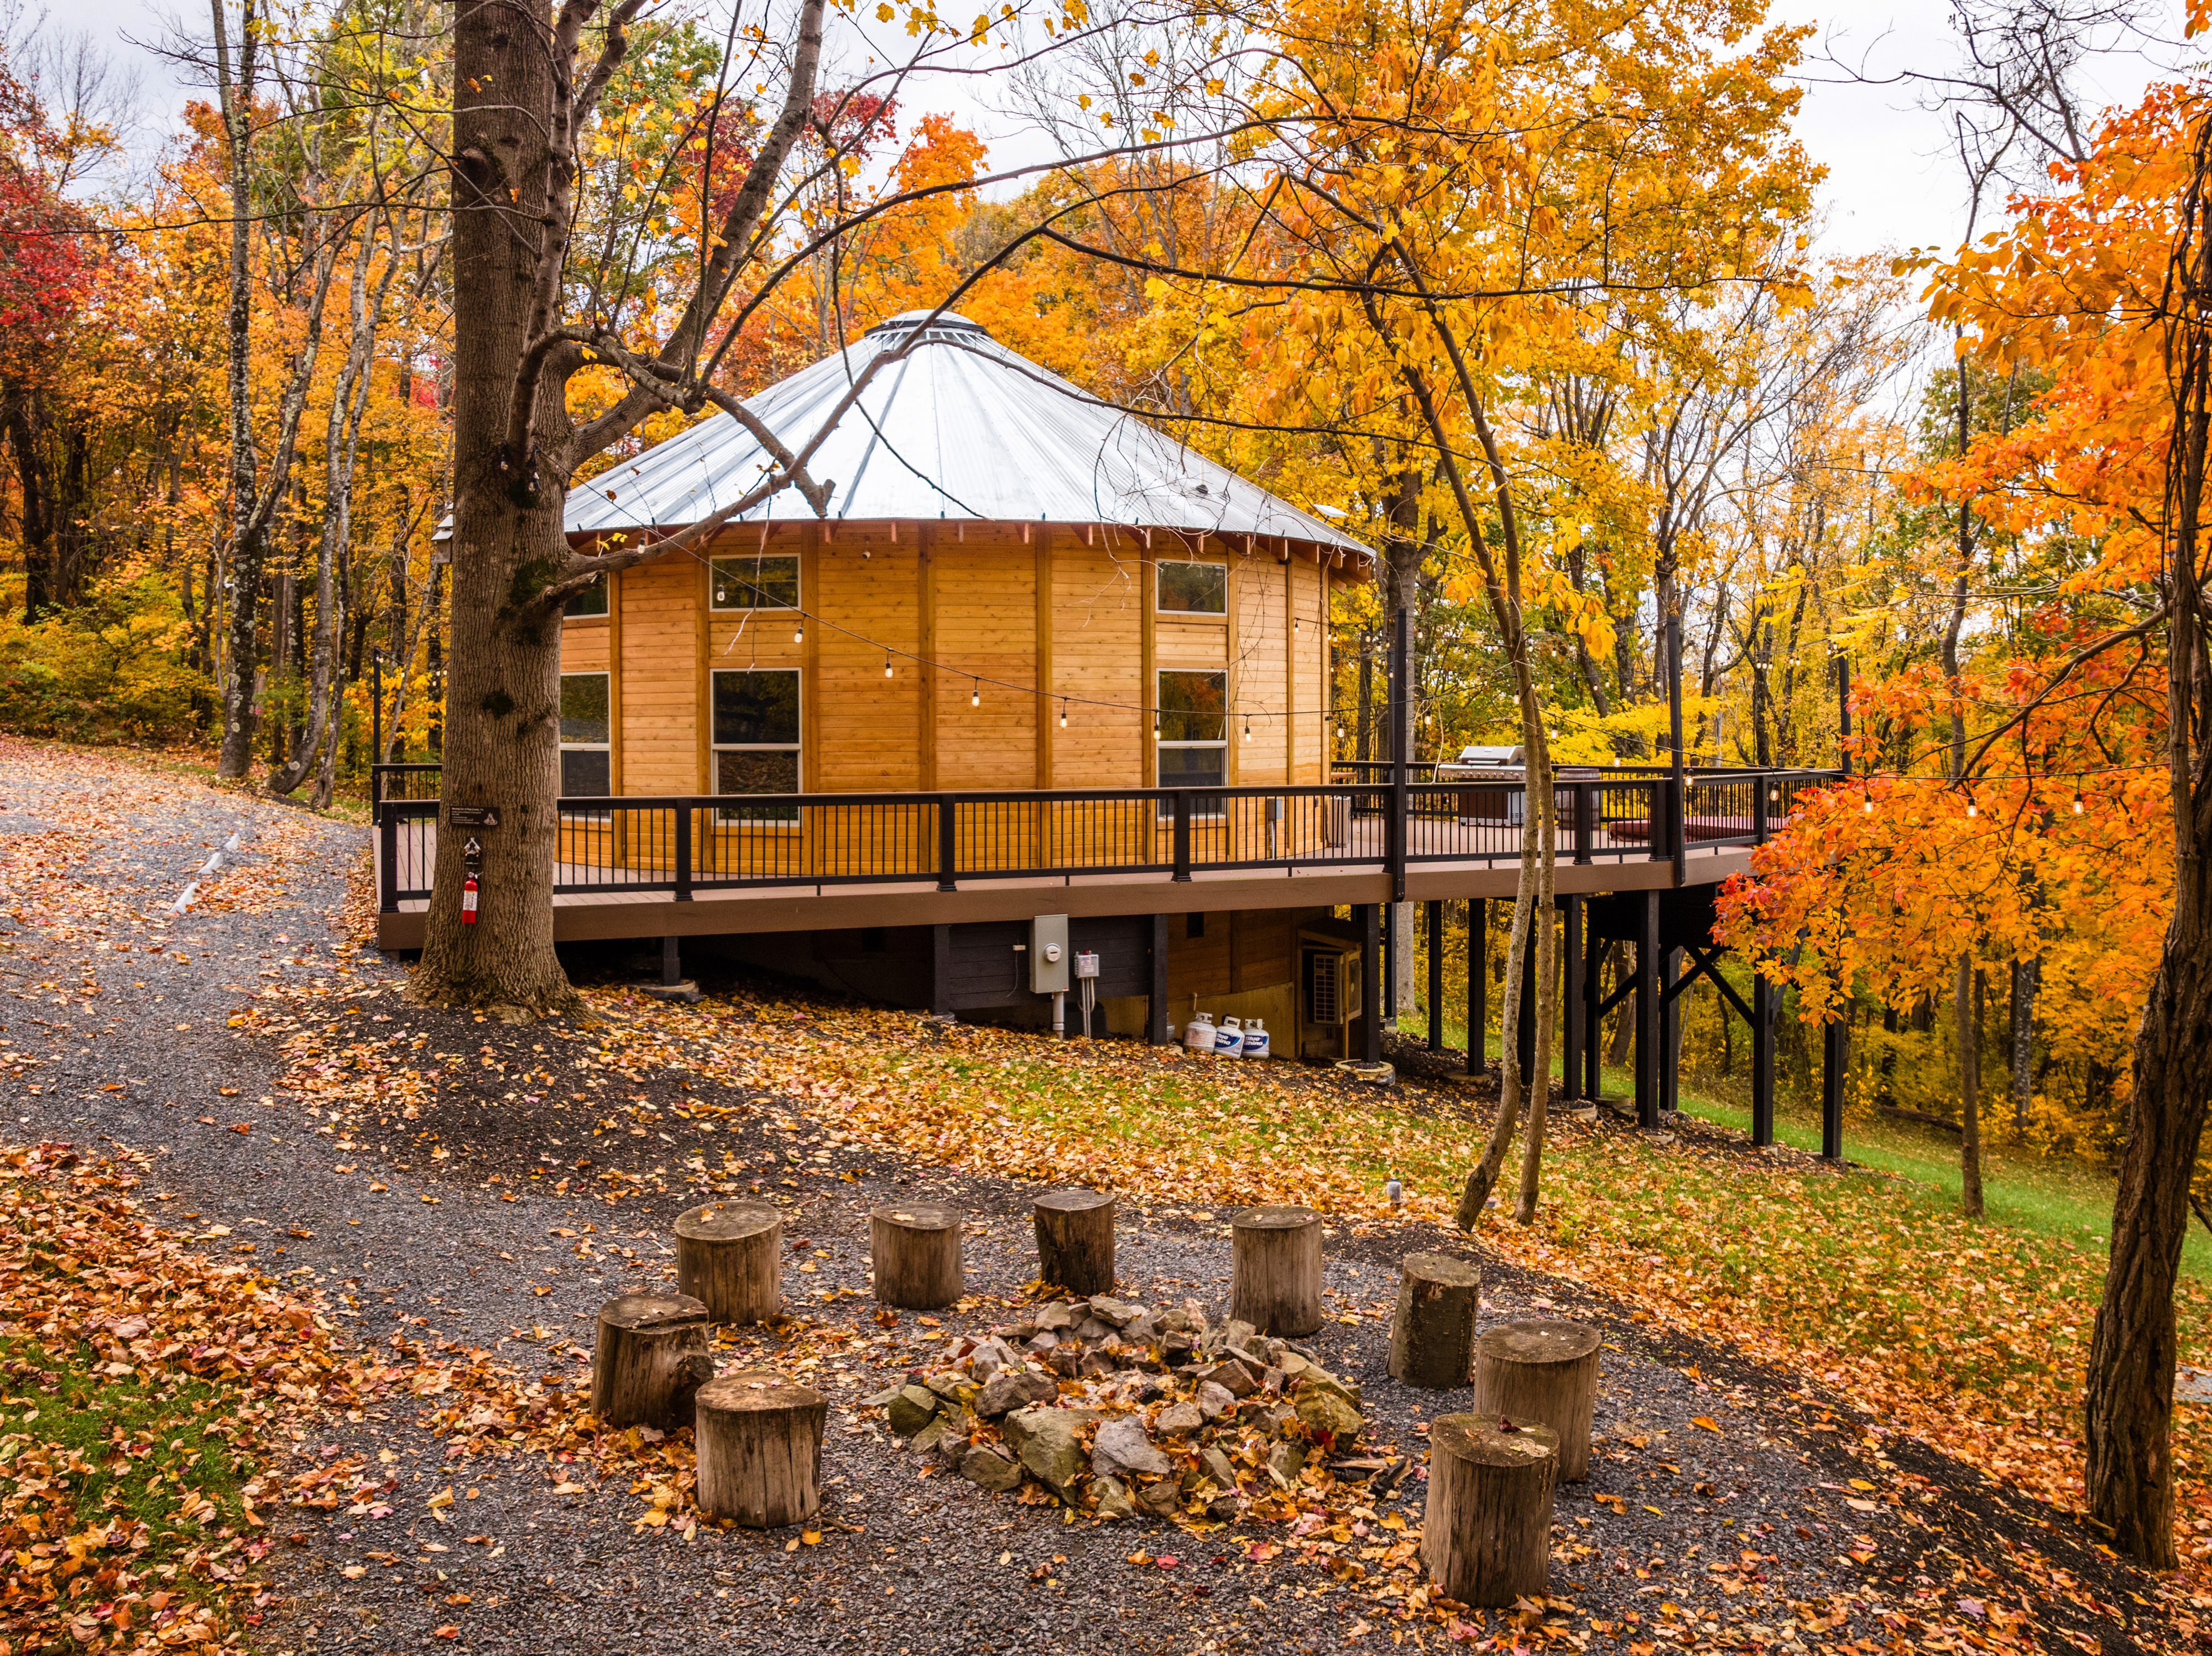 <span  class="uc_style_uc_tiles_grid_image_elementor_uc_items_attribute_title" style="color:#ffffff;">Early misty morning unveils the Shenandoah Yurt amidst a kaleidoscope of autumnal hues and tranquility</span>